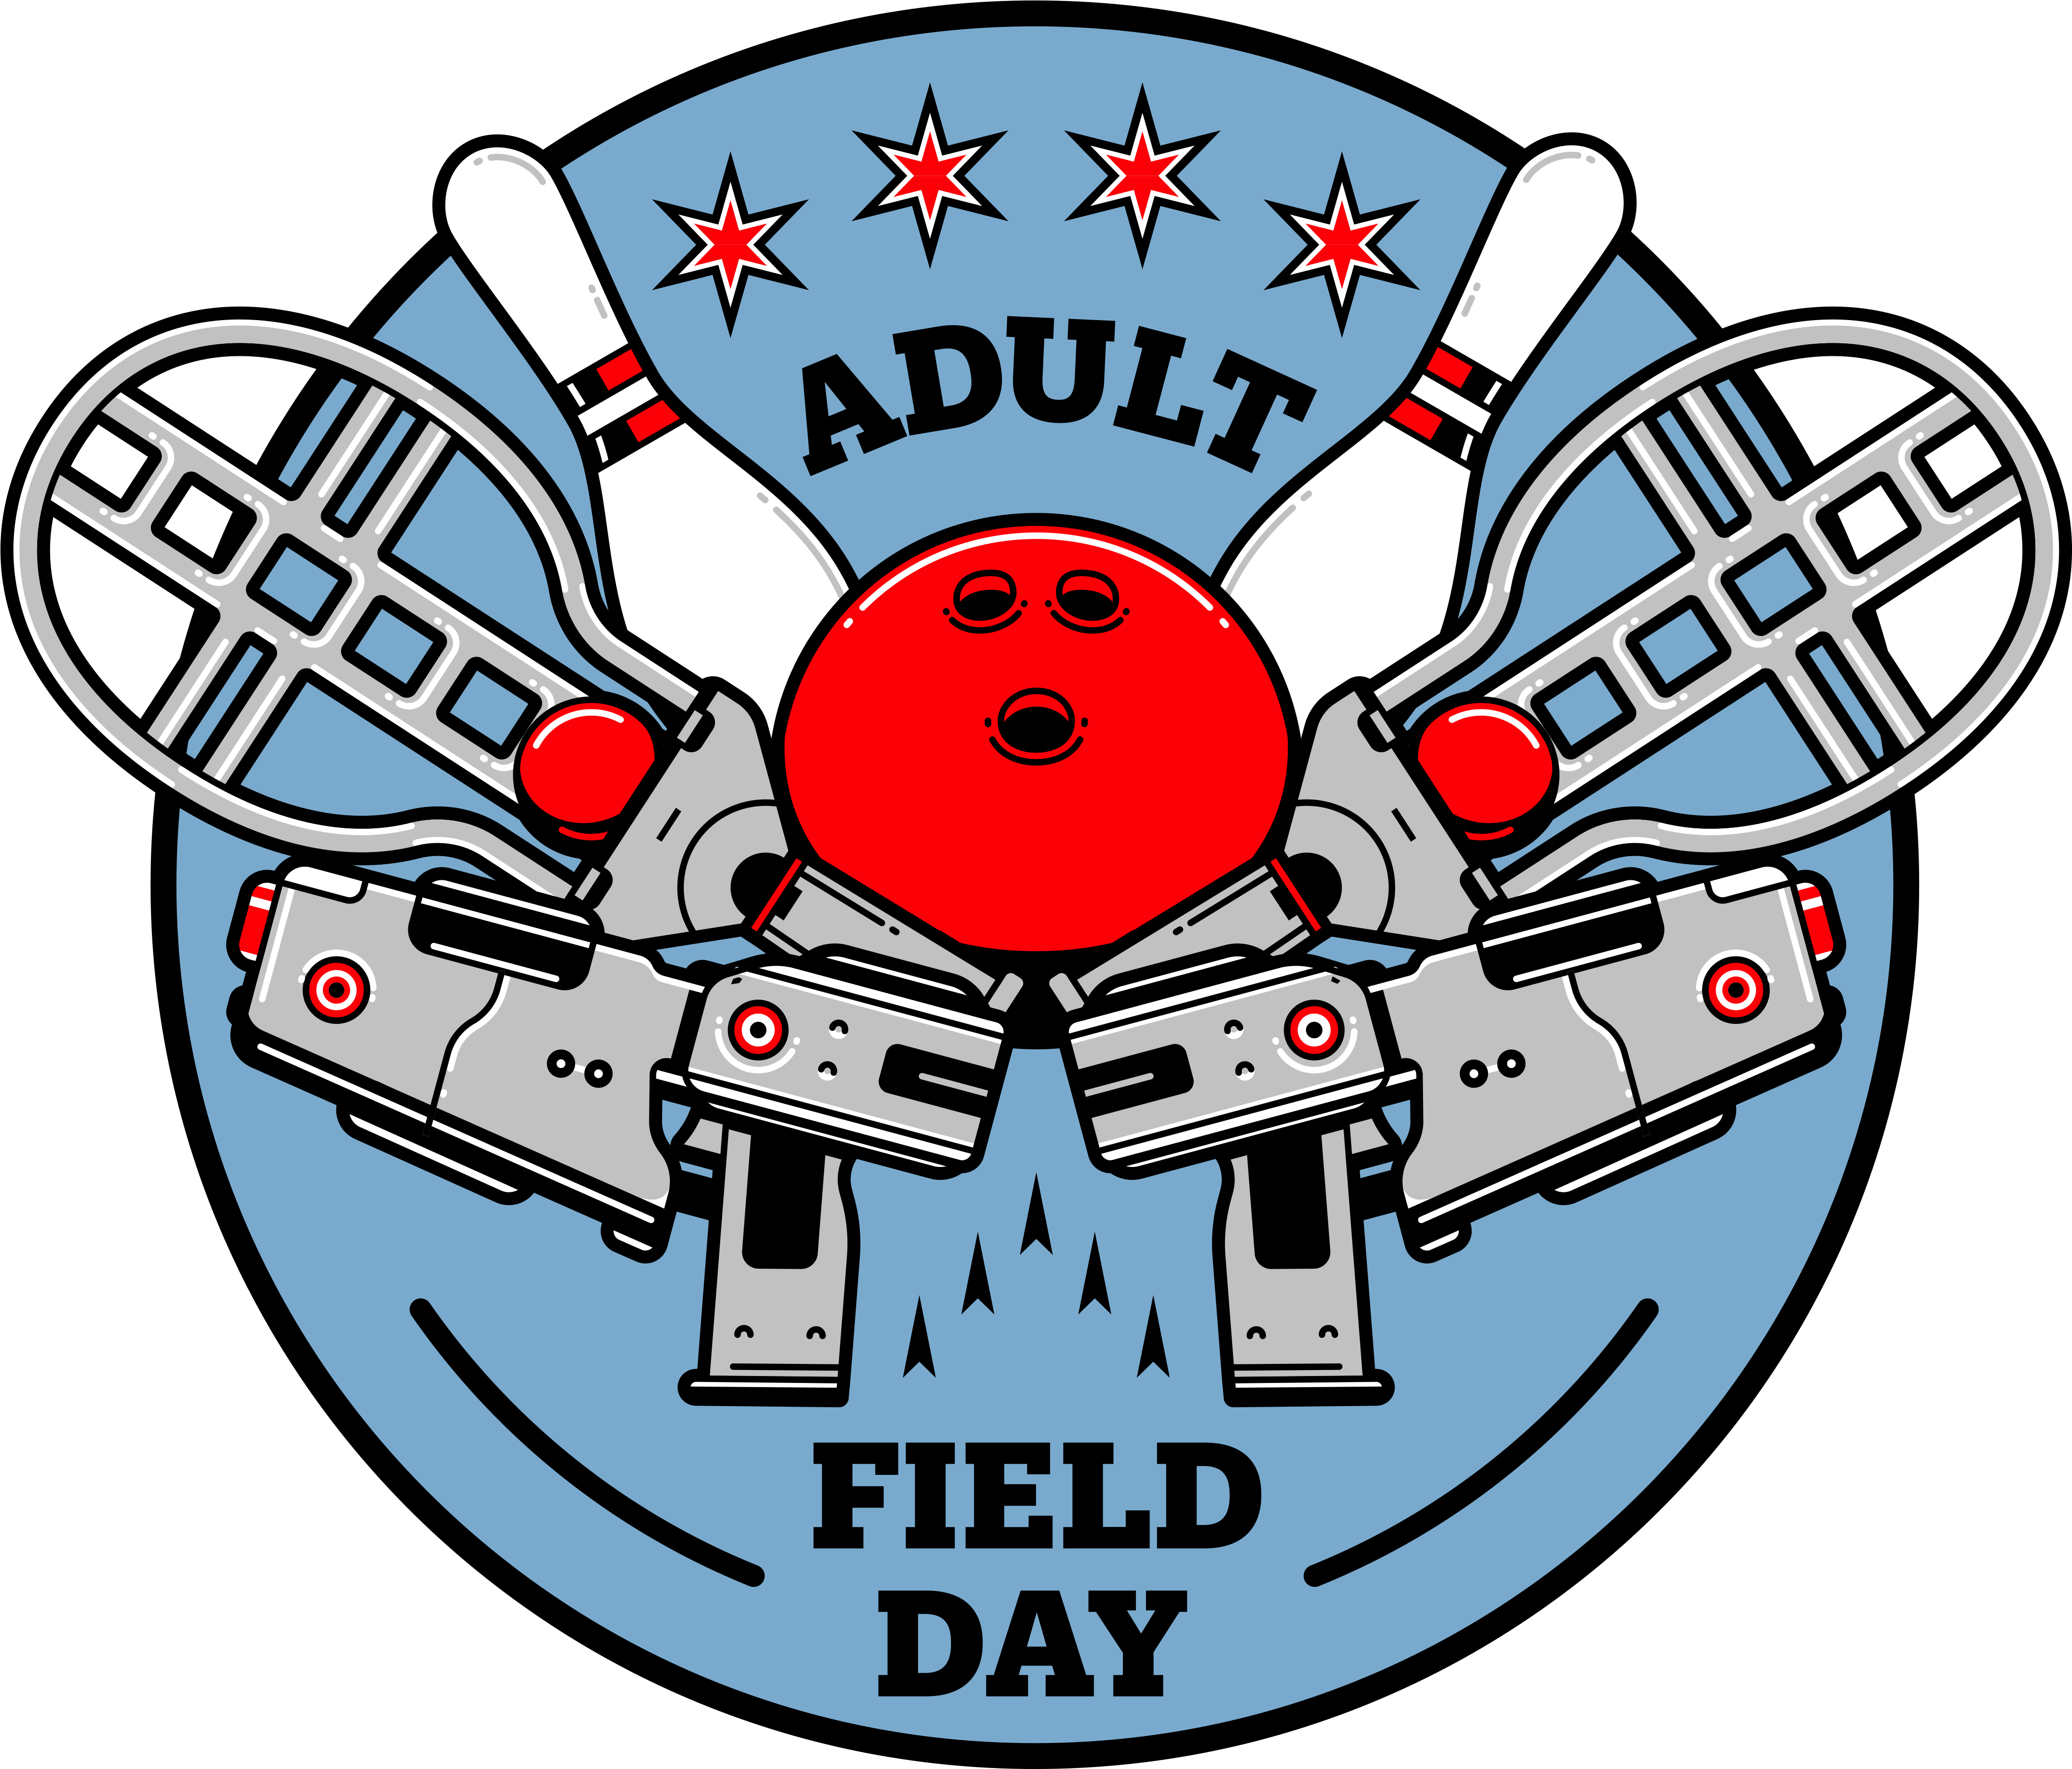 Therefore, This Adult Field Day Event Will Benefit - Circle (4500x4500)